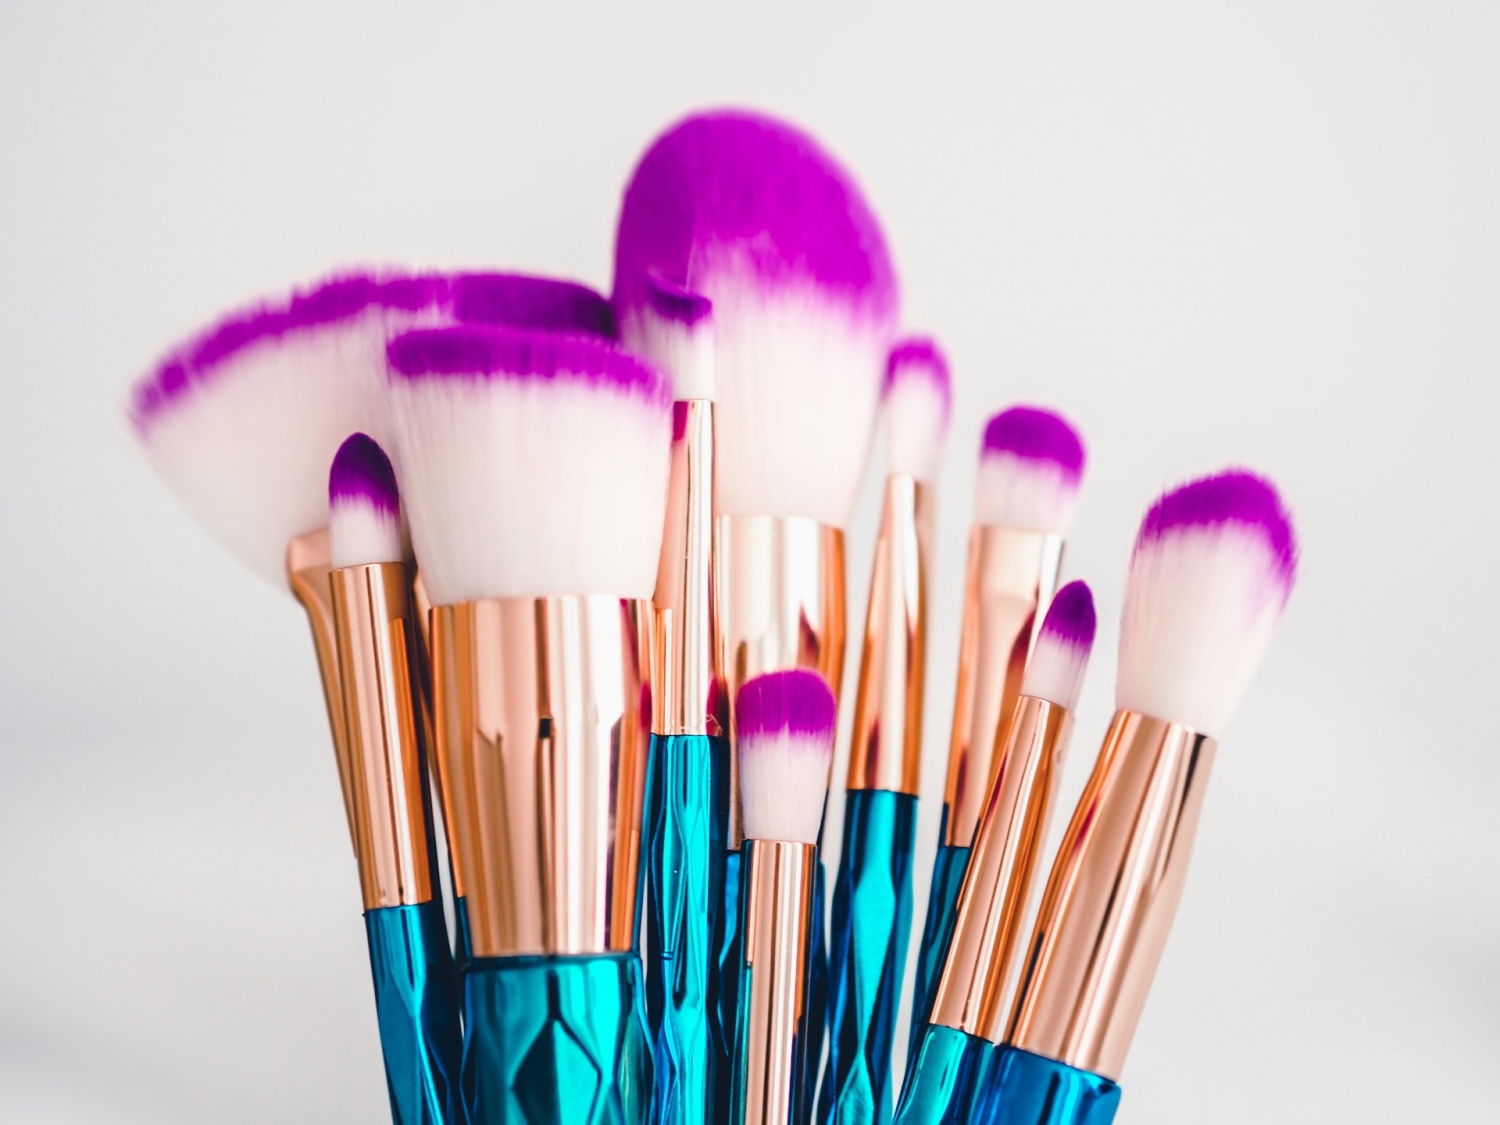 How to Clean Makeup Brushes: The Lazy Girl’s Guide